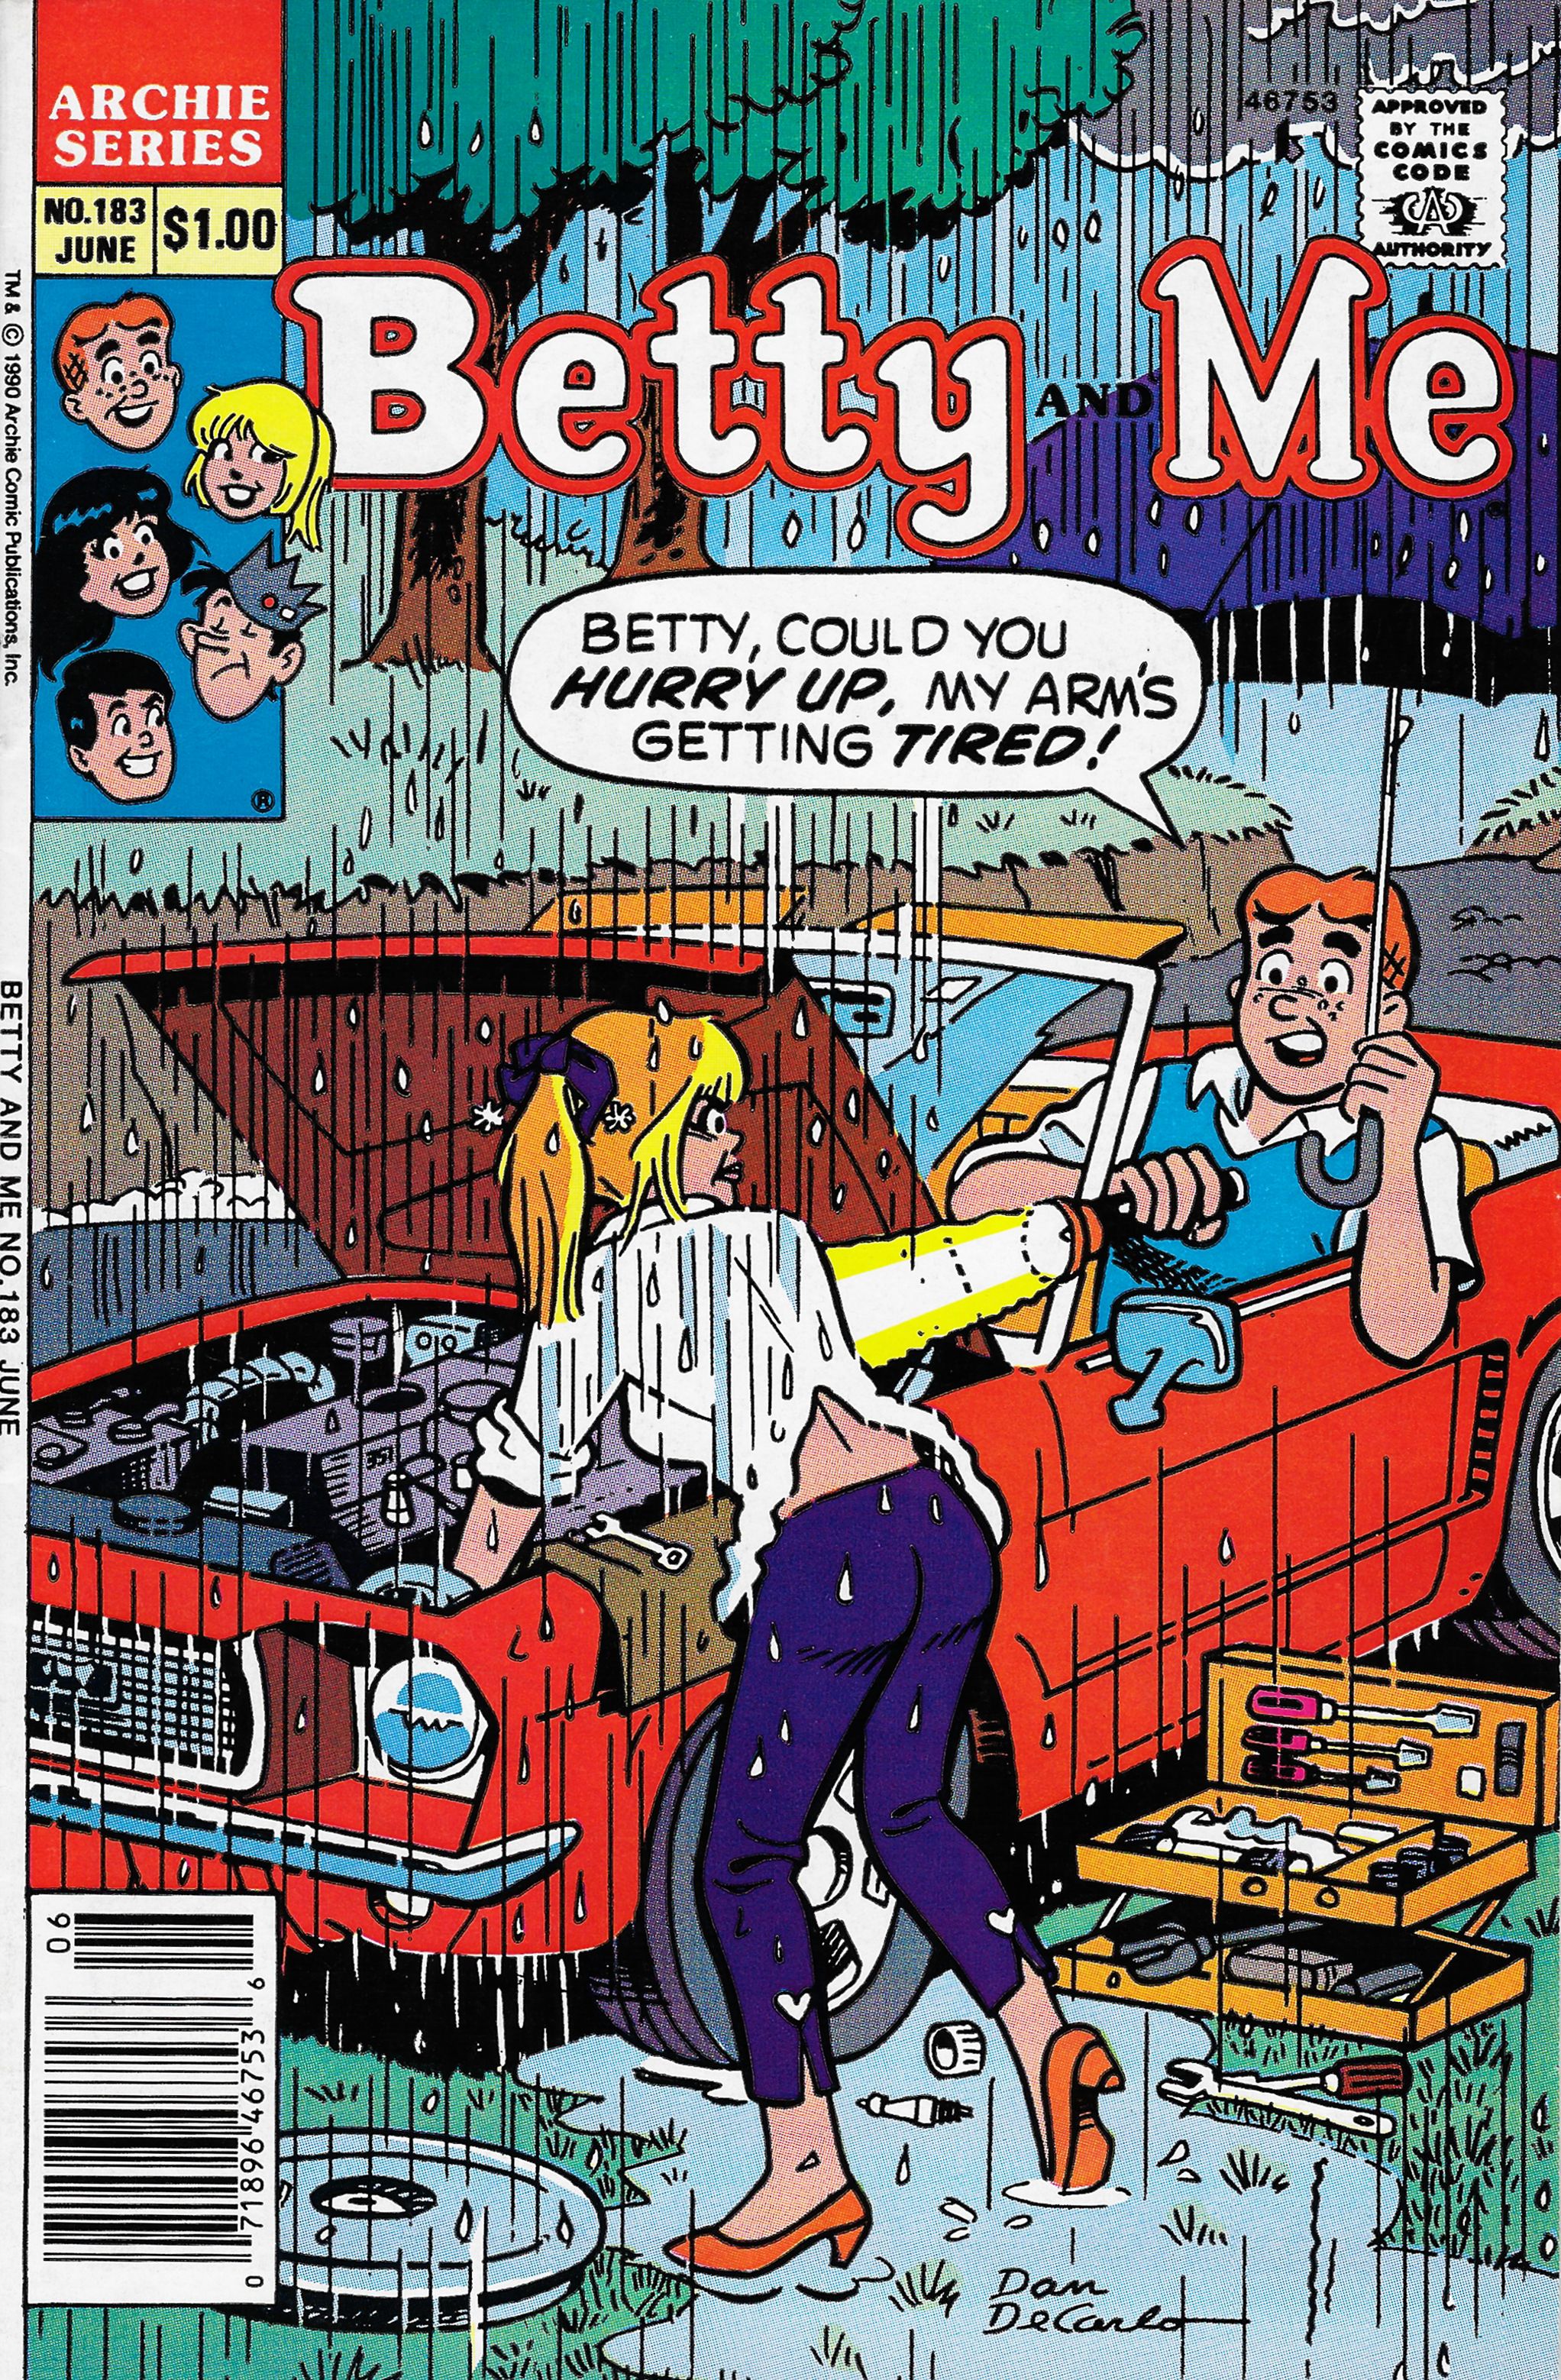 Read online Betty and Me comic -  Issue #183 - 1